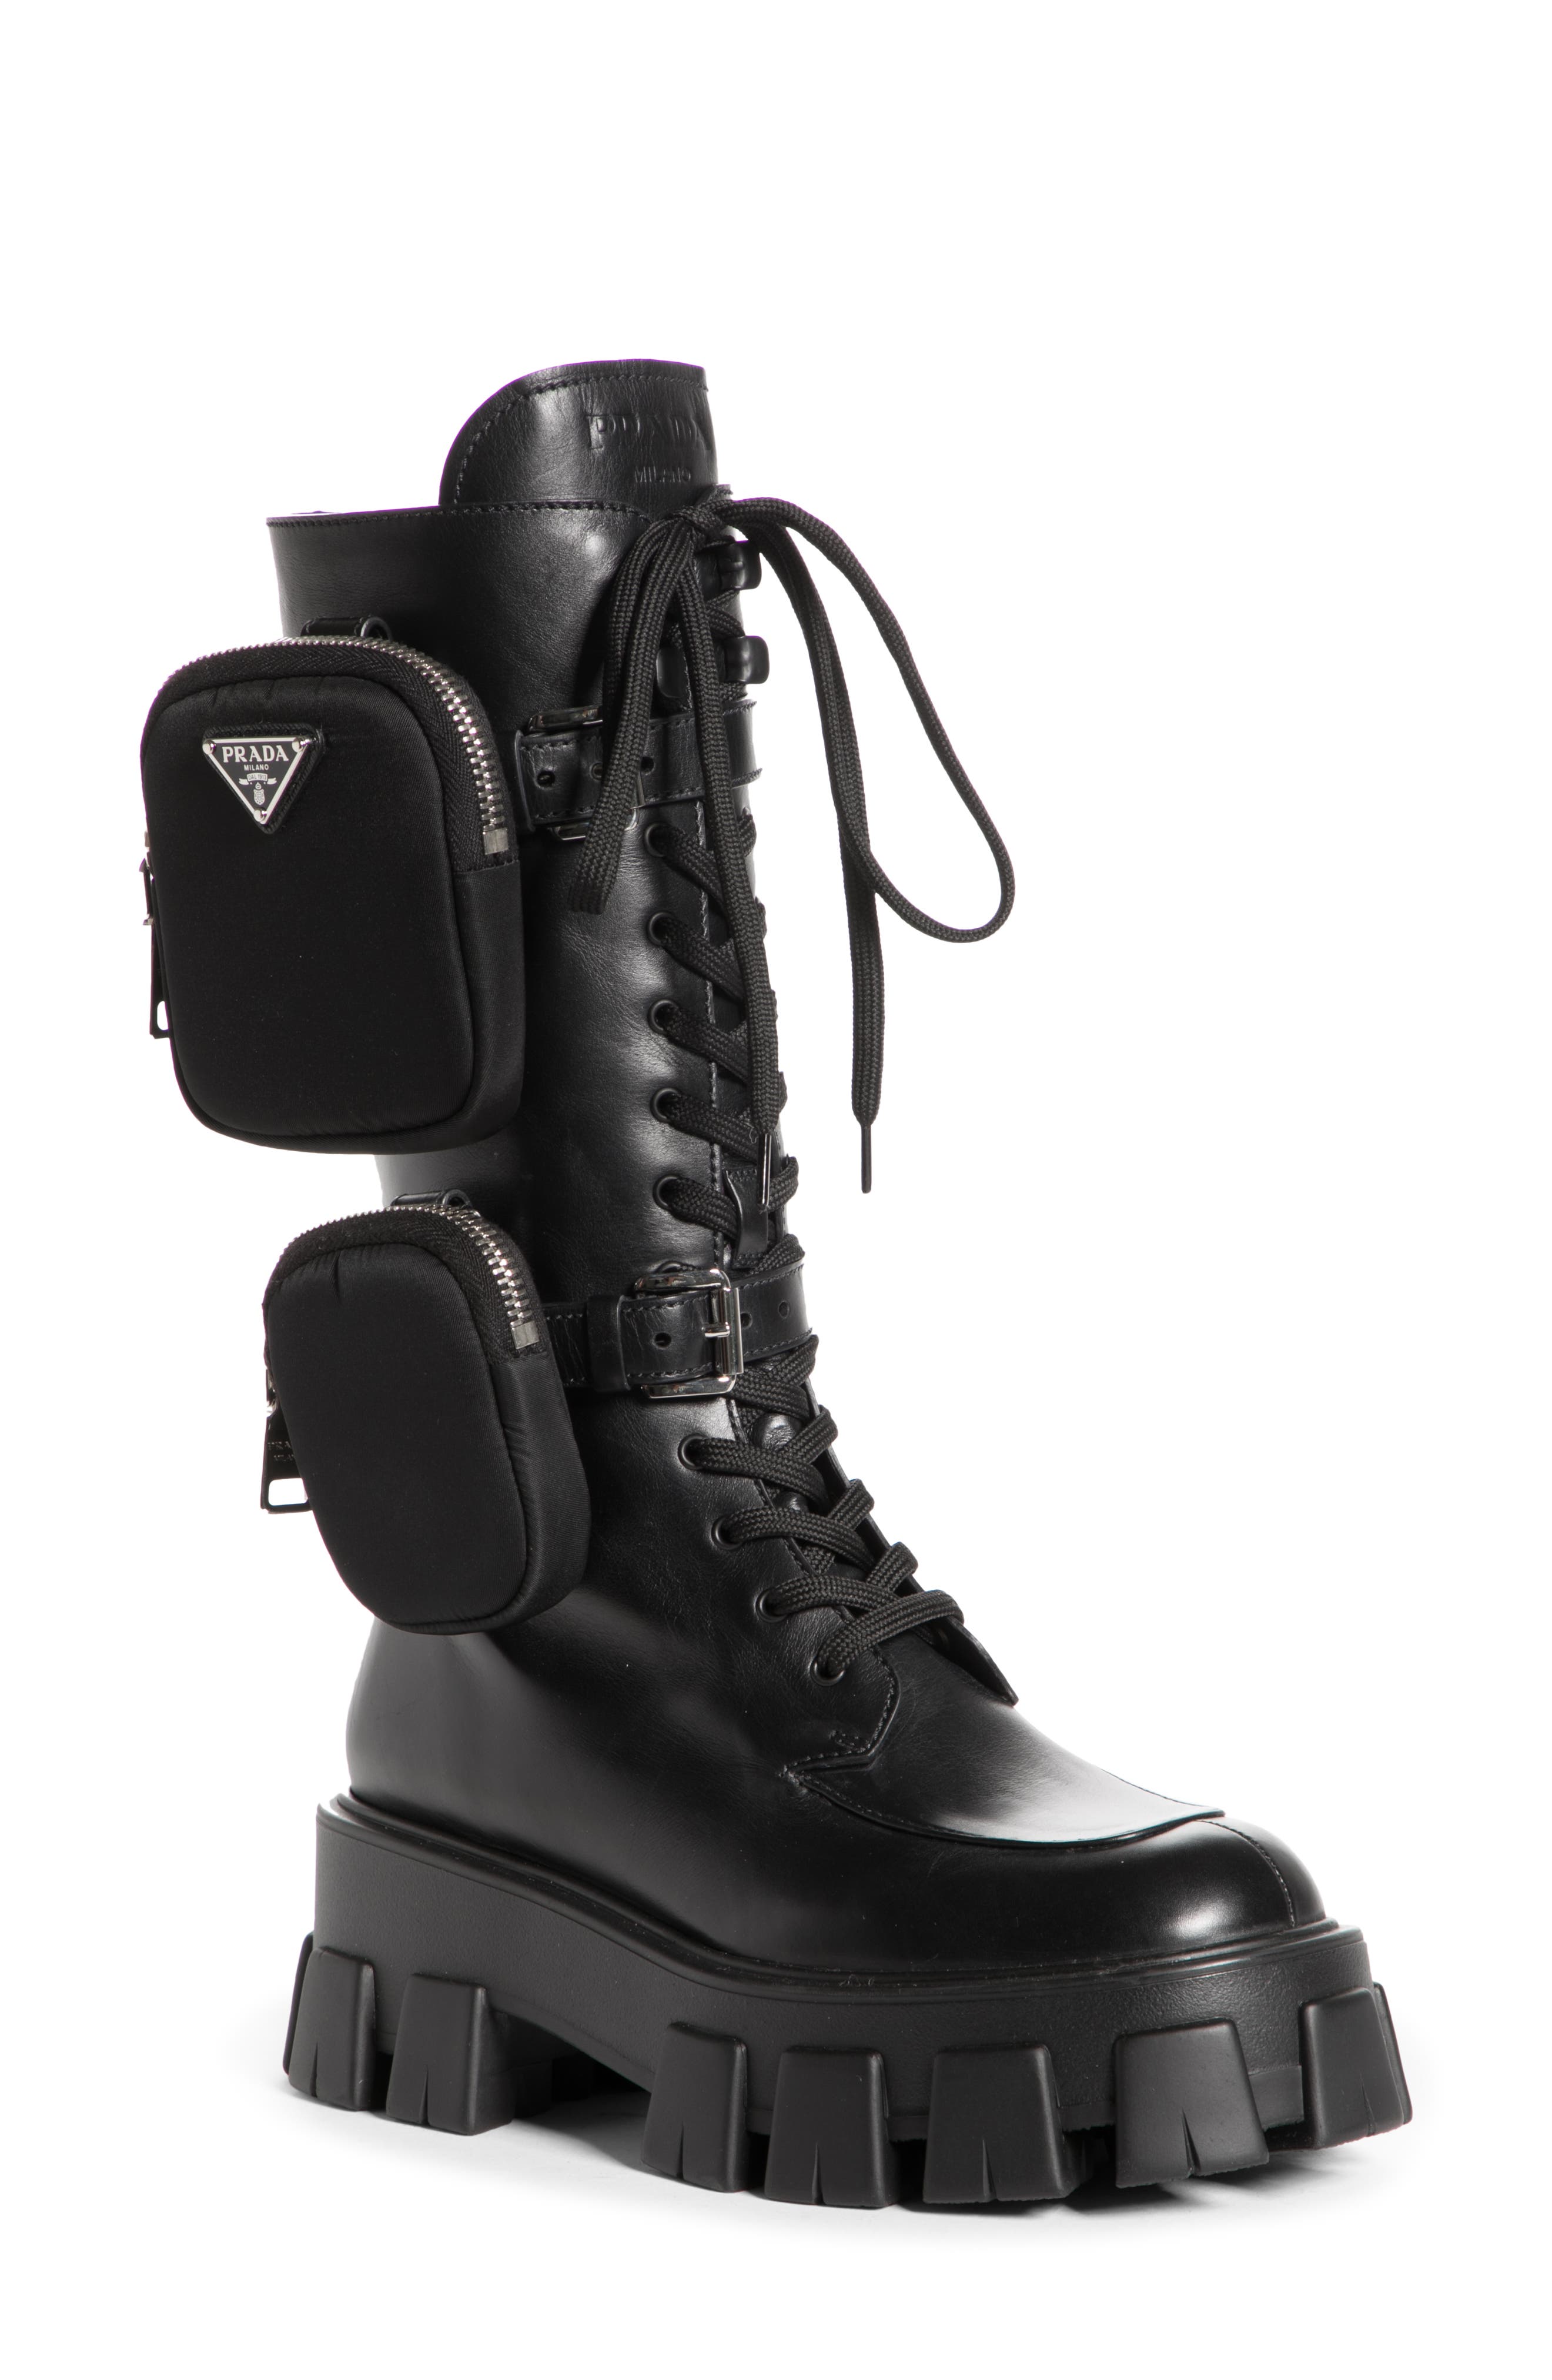 Prada Removable Pouch Combat Boot in Black at Nordstrom, Size 8Us